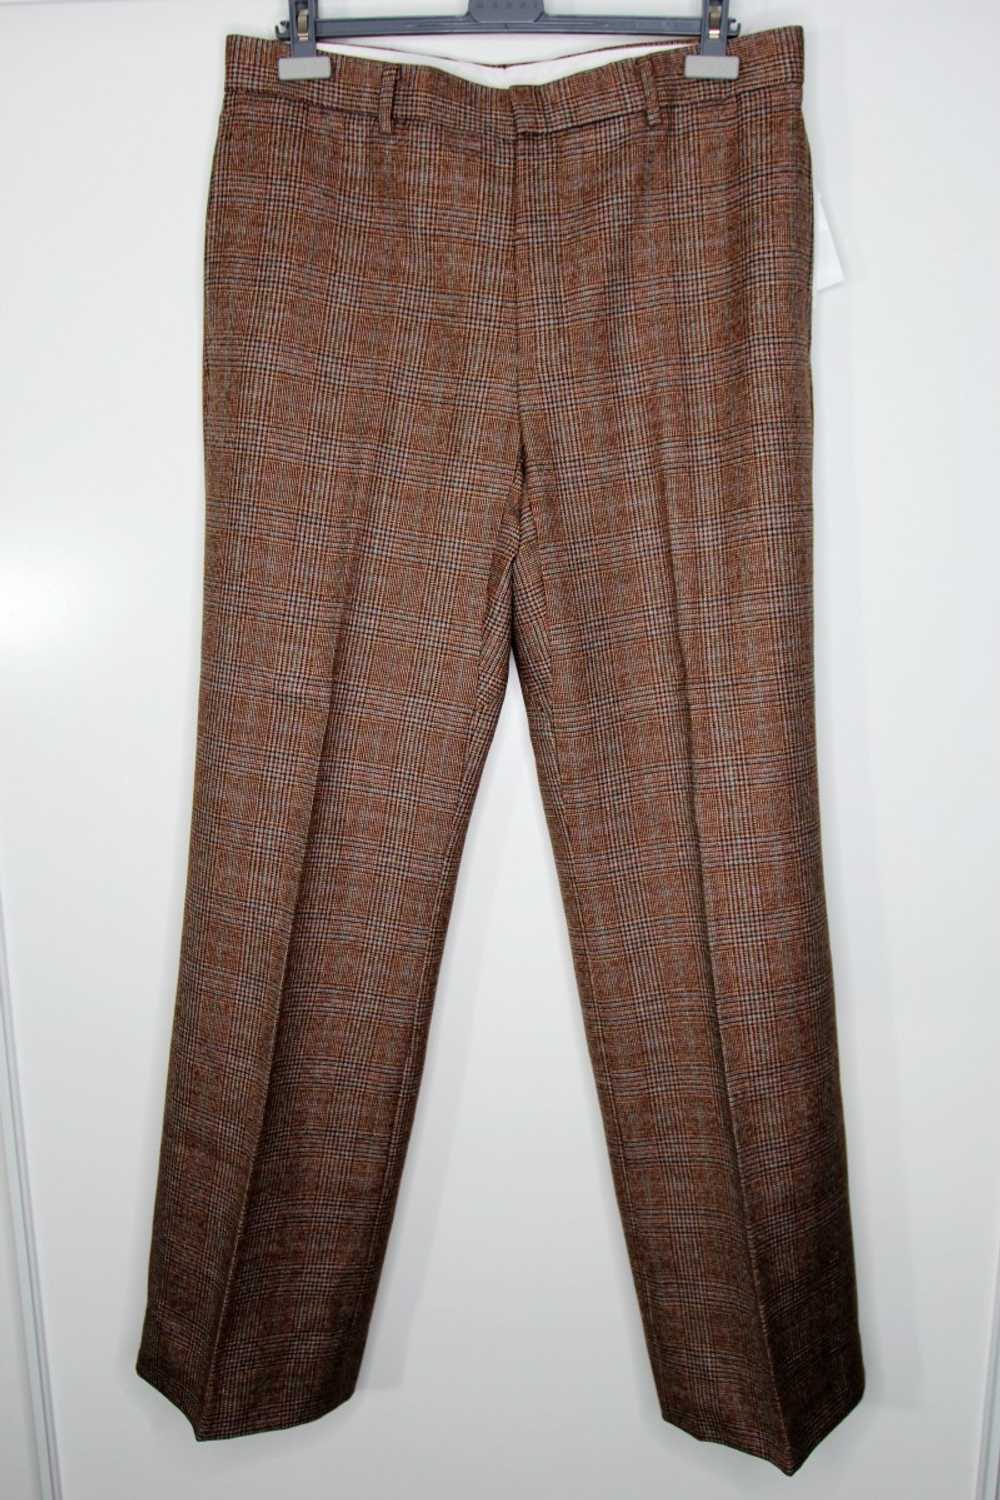 BNWT AW20 WOOYOUNGMI PRINCE OF WALES PANTS 48 - image 2